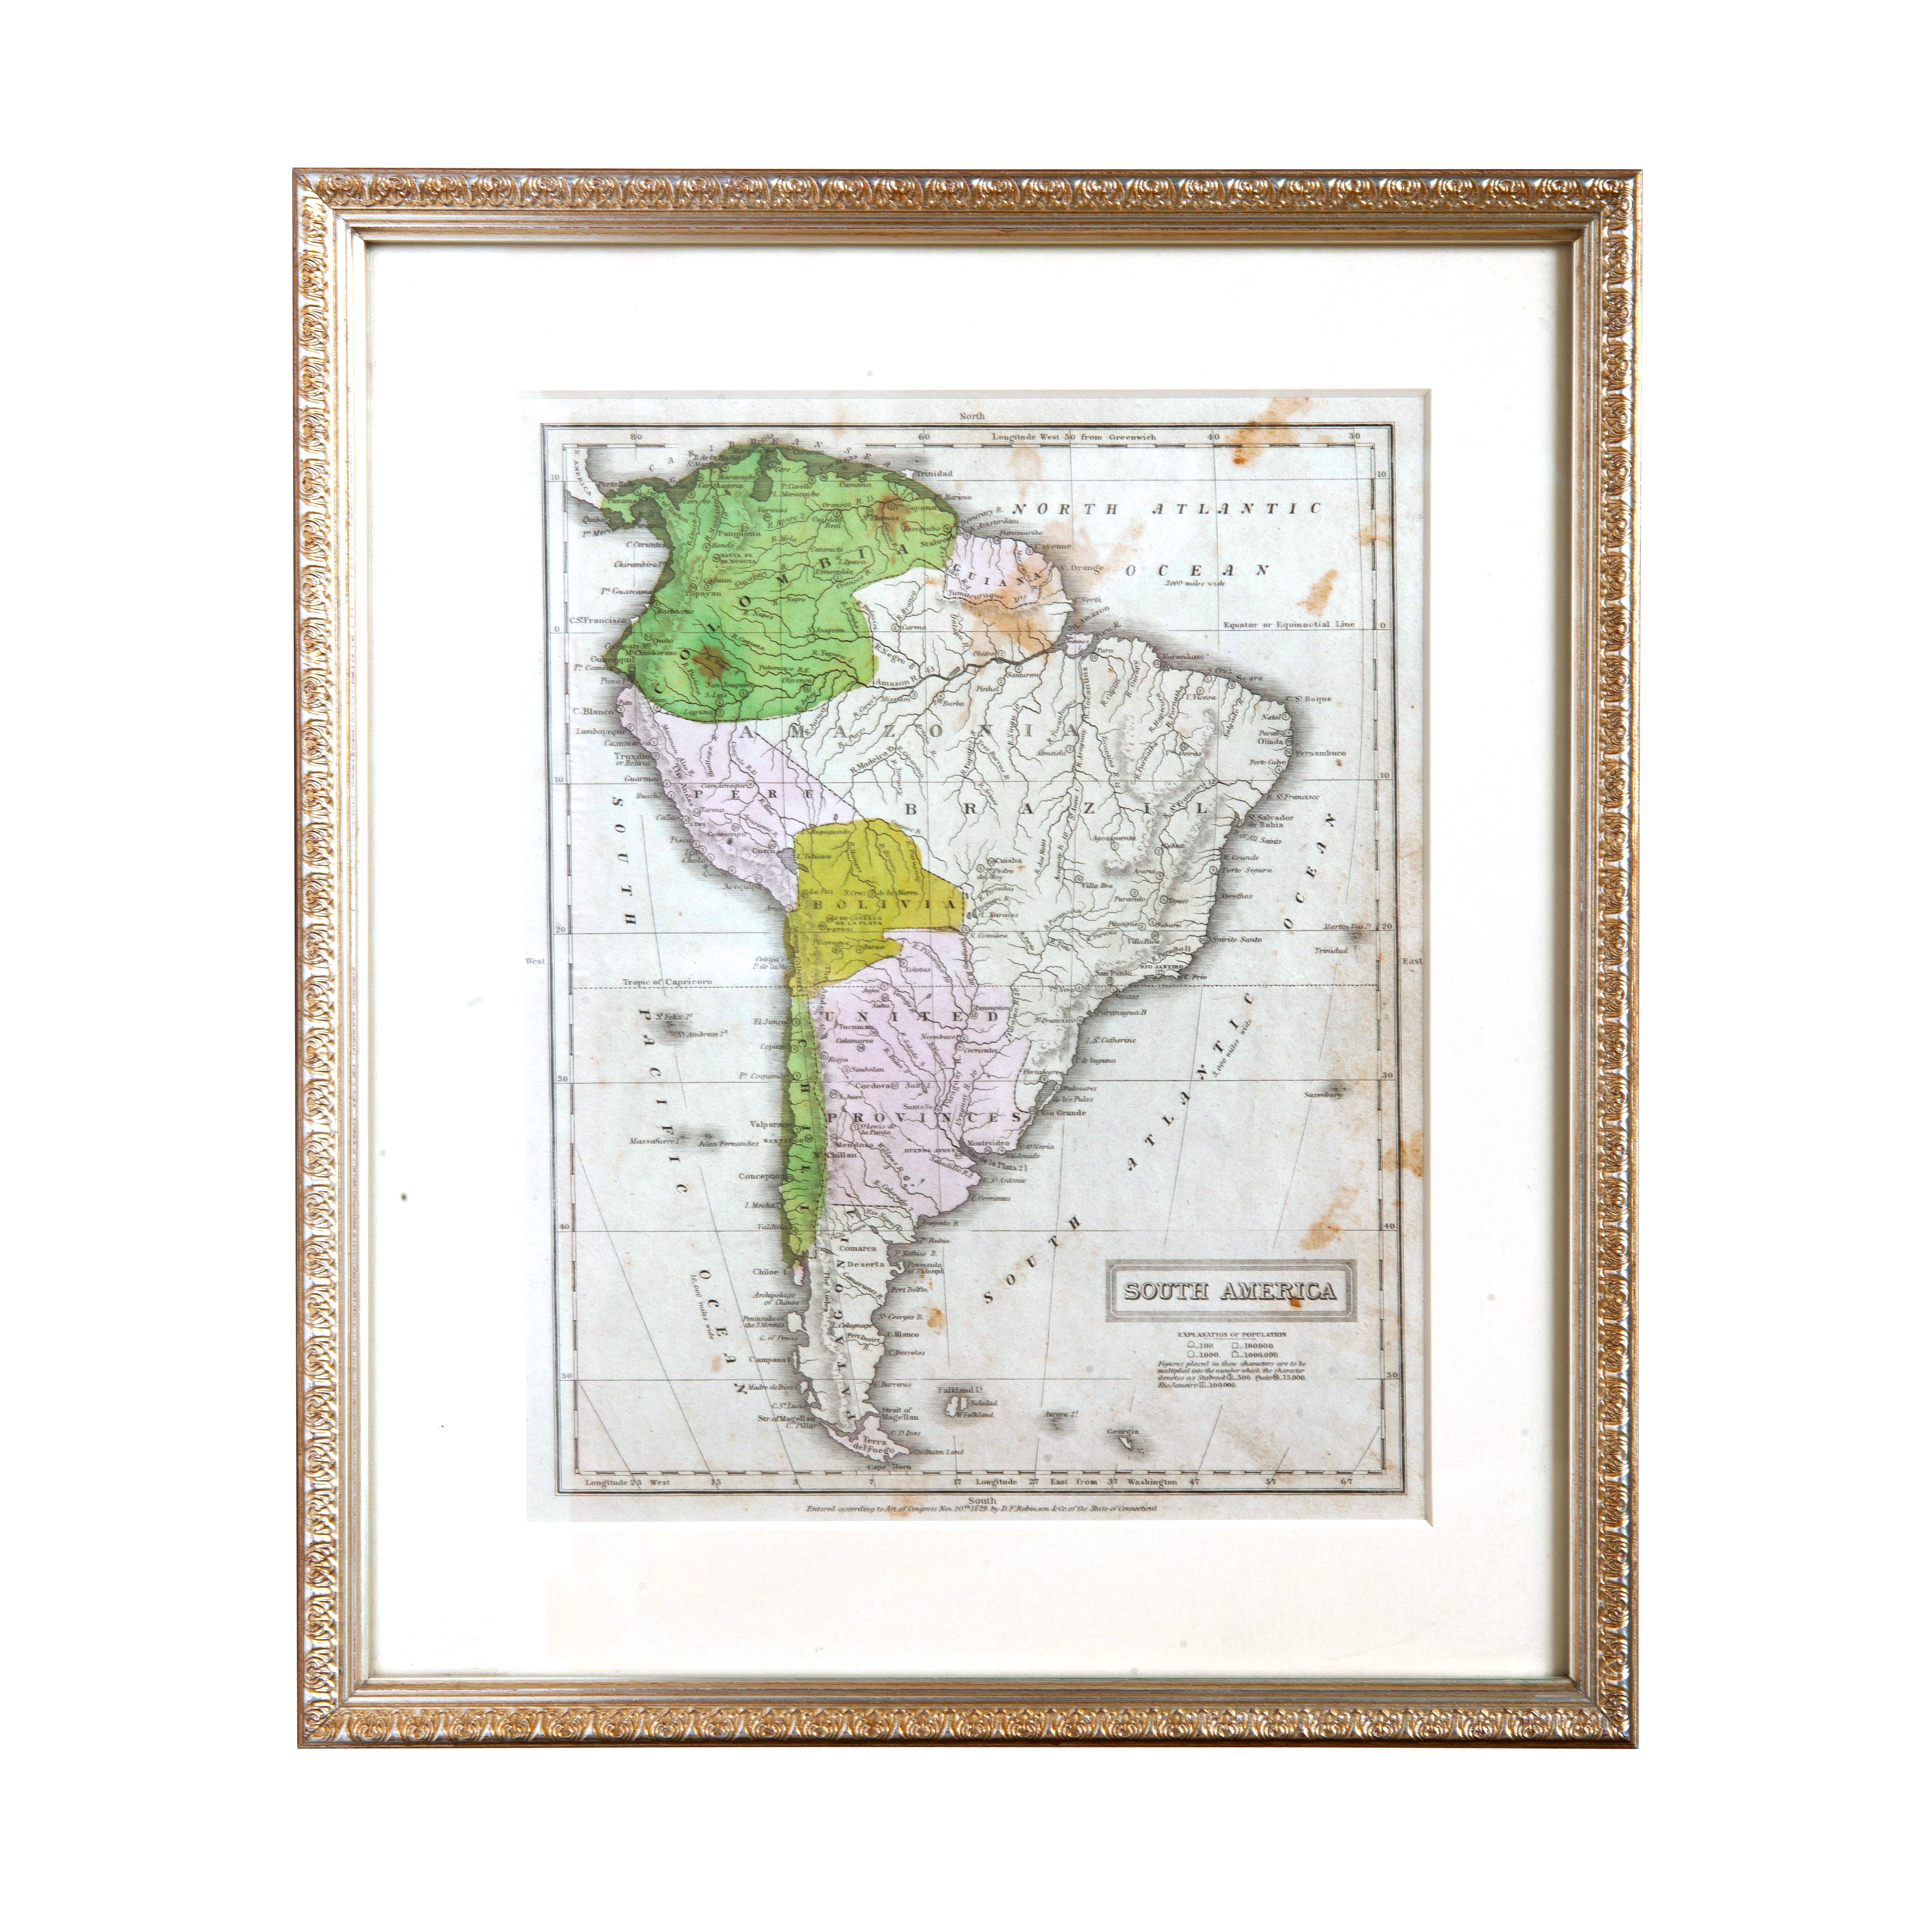 Antique Map of South America~P76420659